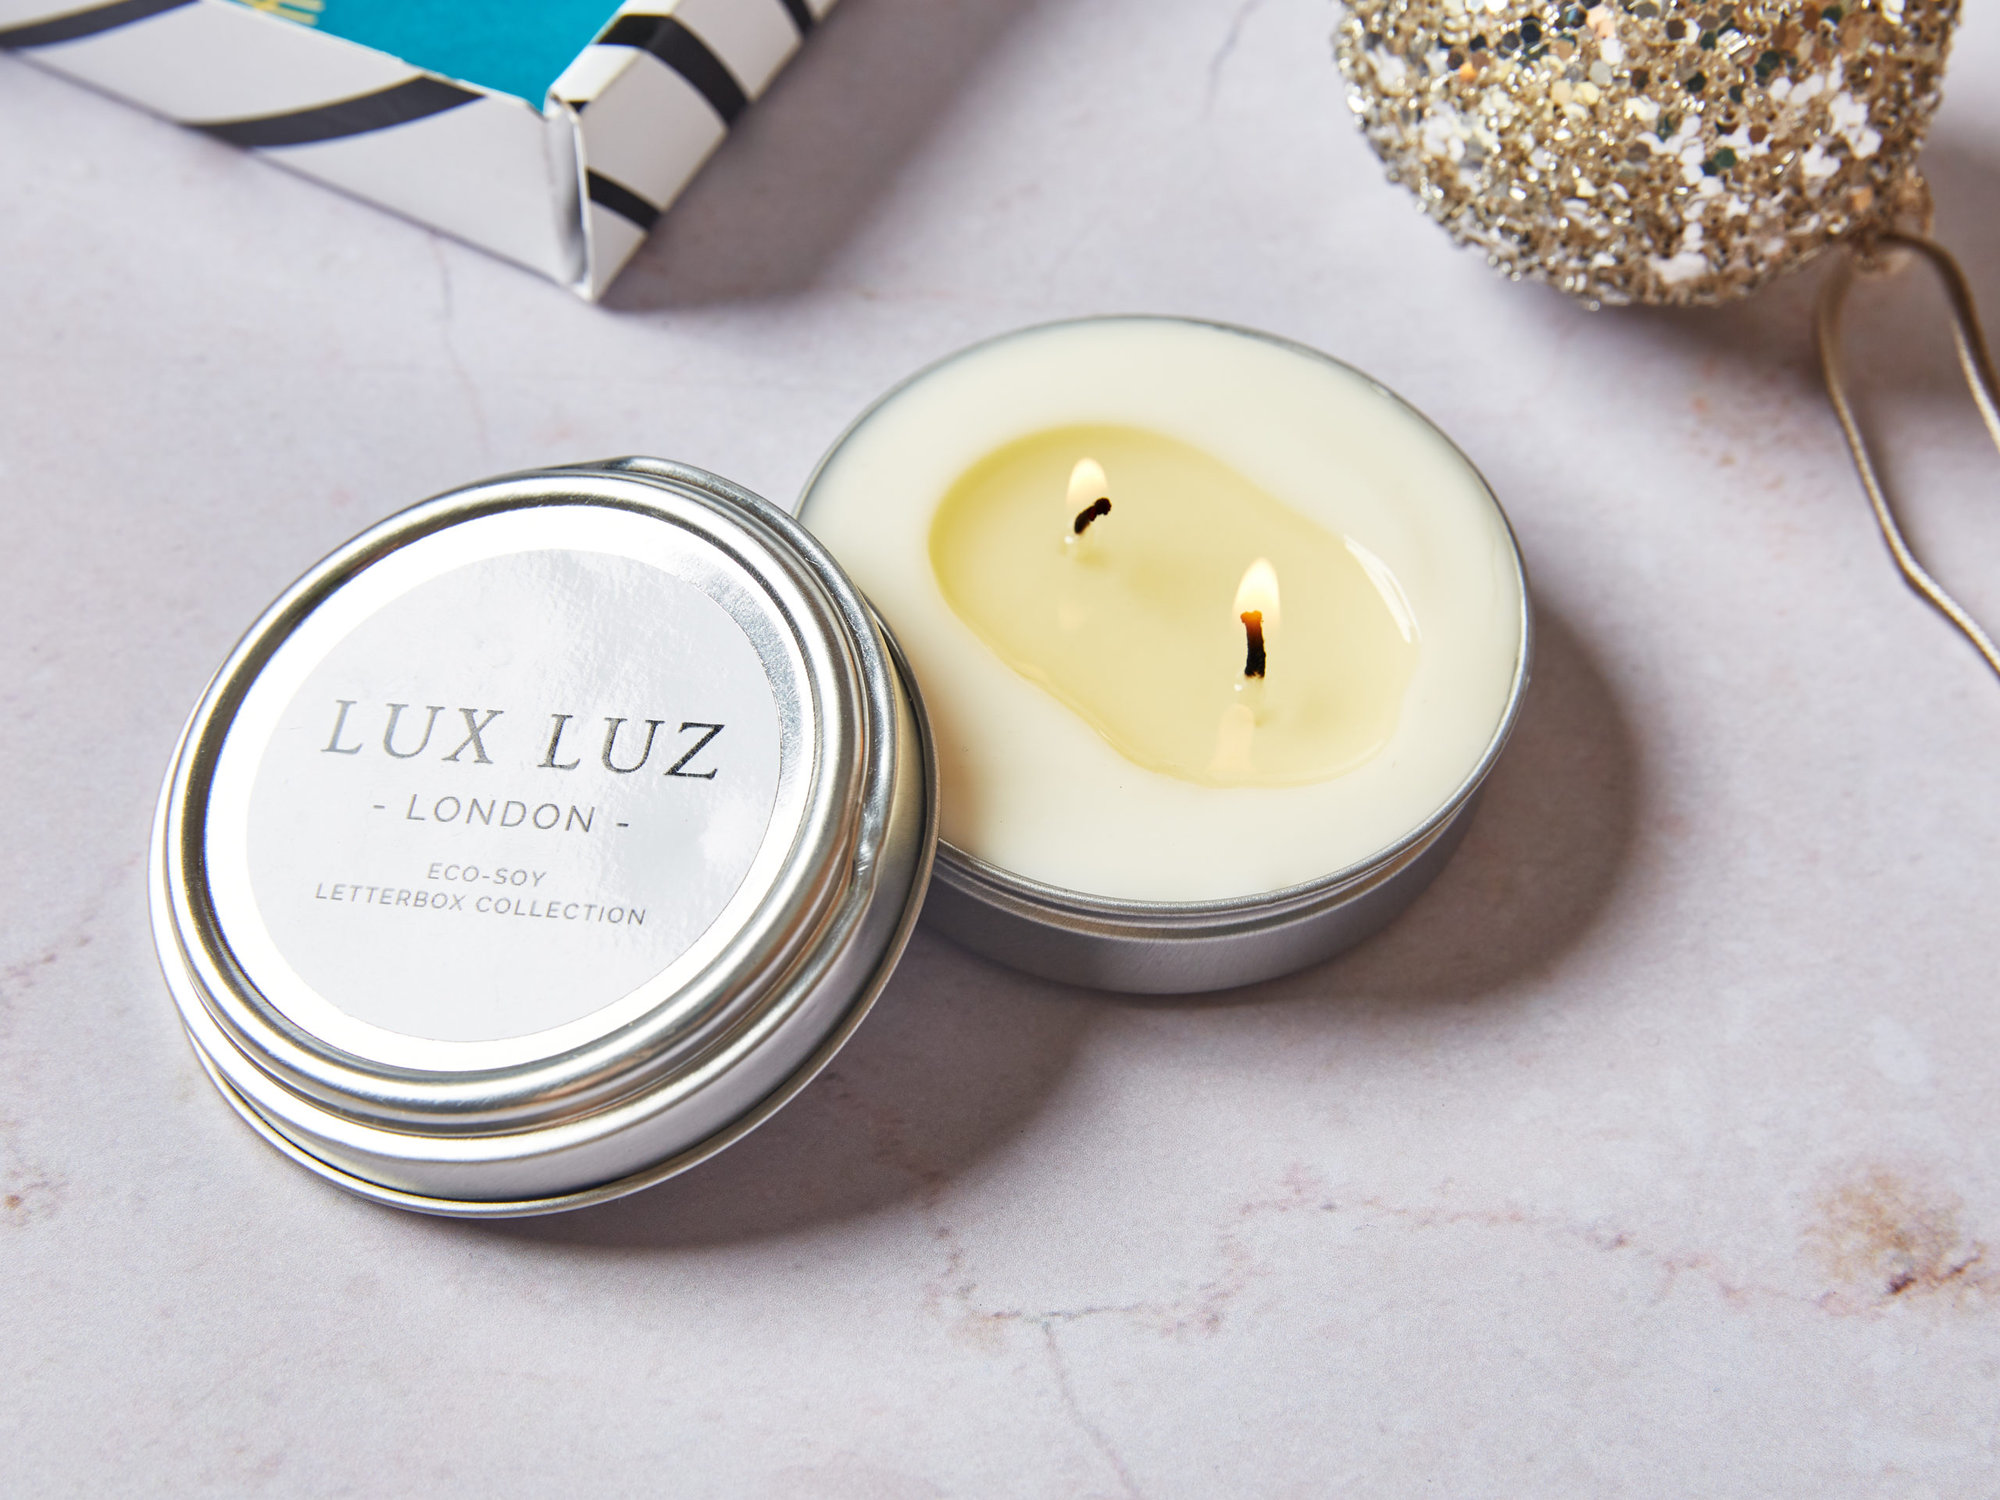 The Life's Little Luxuries Christmas Letterbox Gift